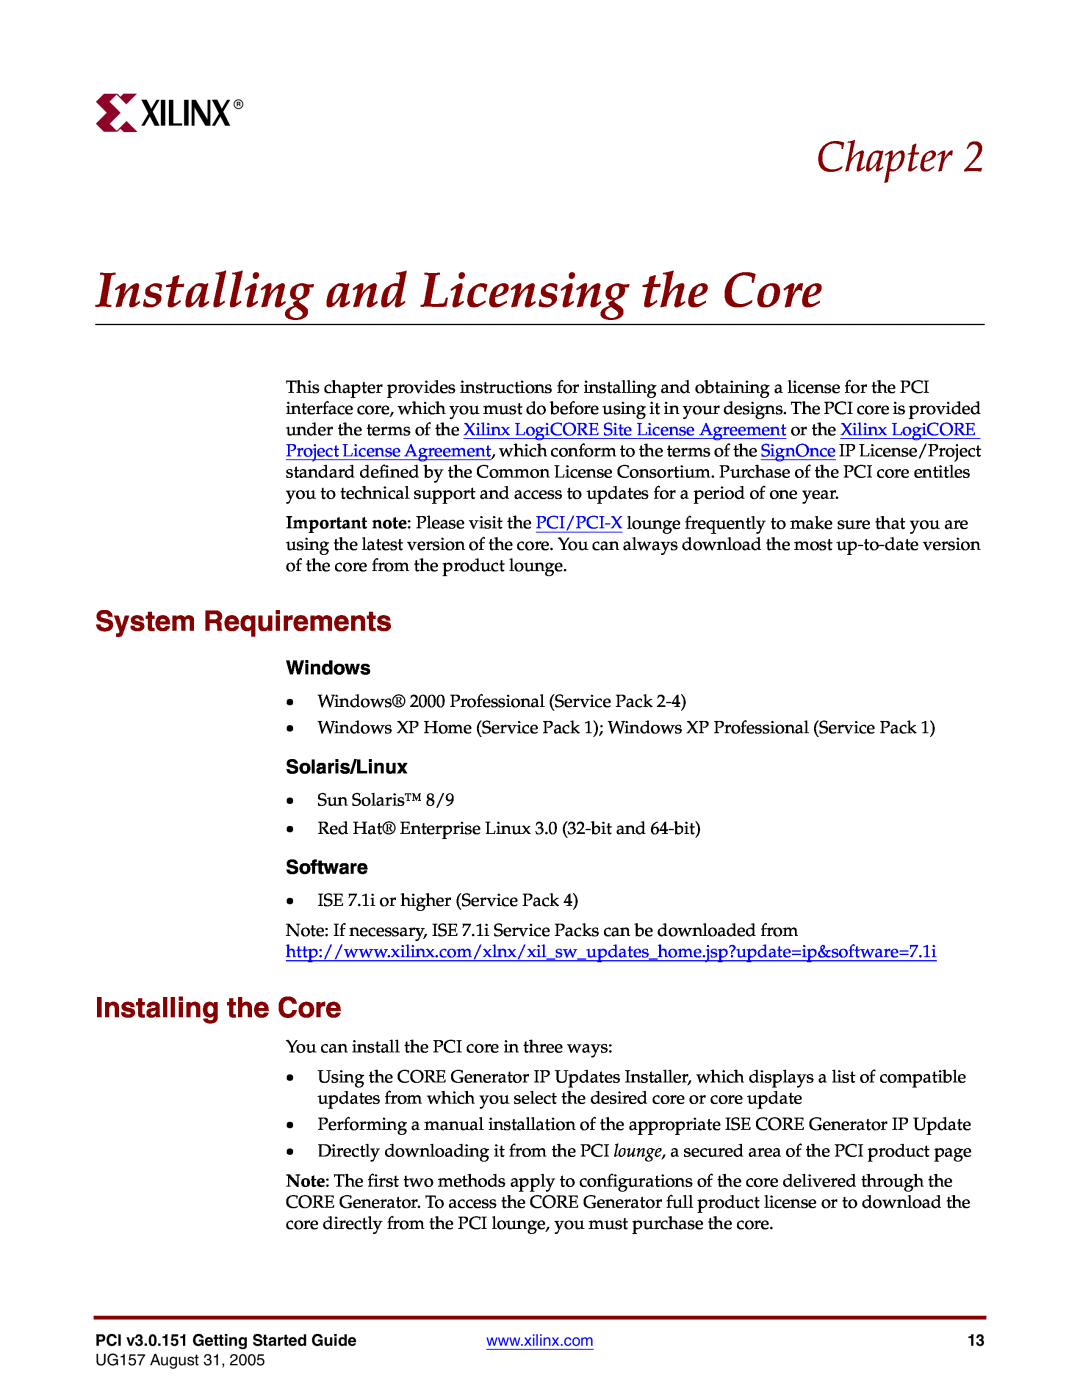 Xilinx PCI v3.0 Installing and Licensing the Core, System Requirements, Installing the Core, Chapter, Windows, Software 